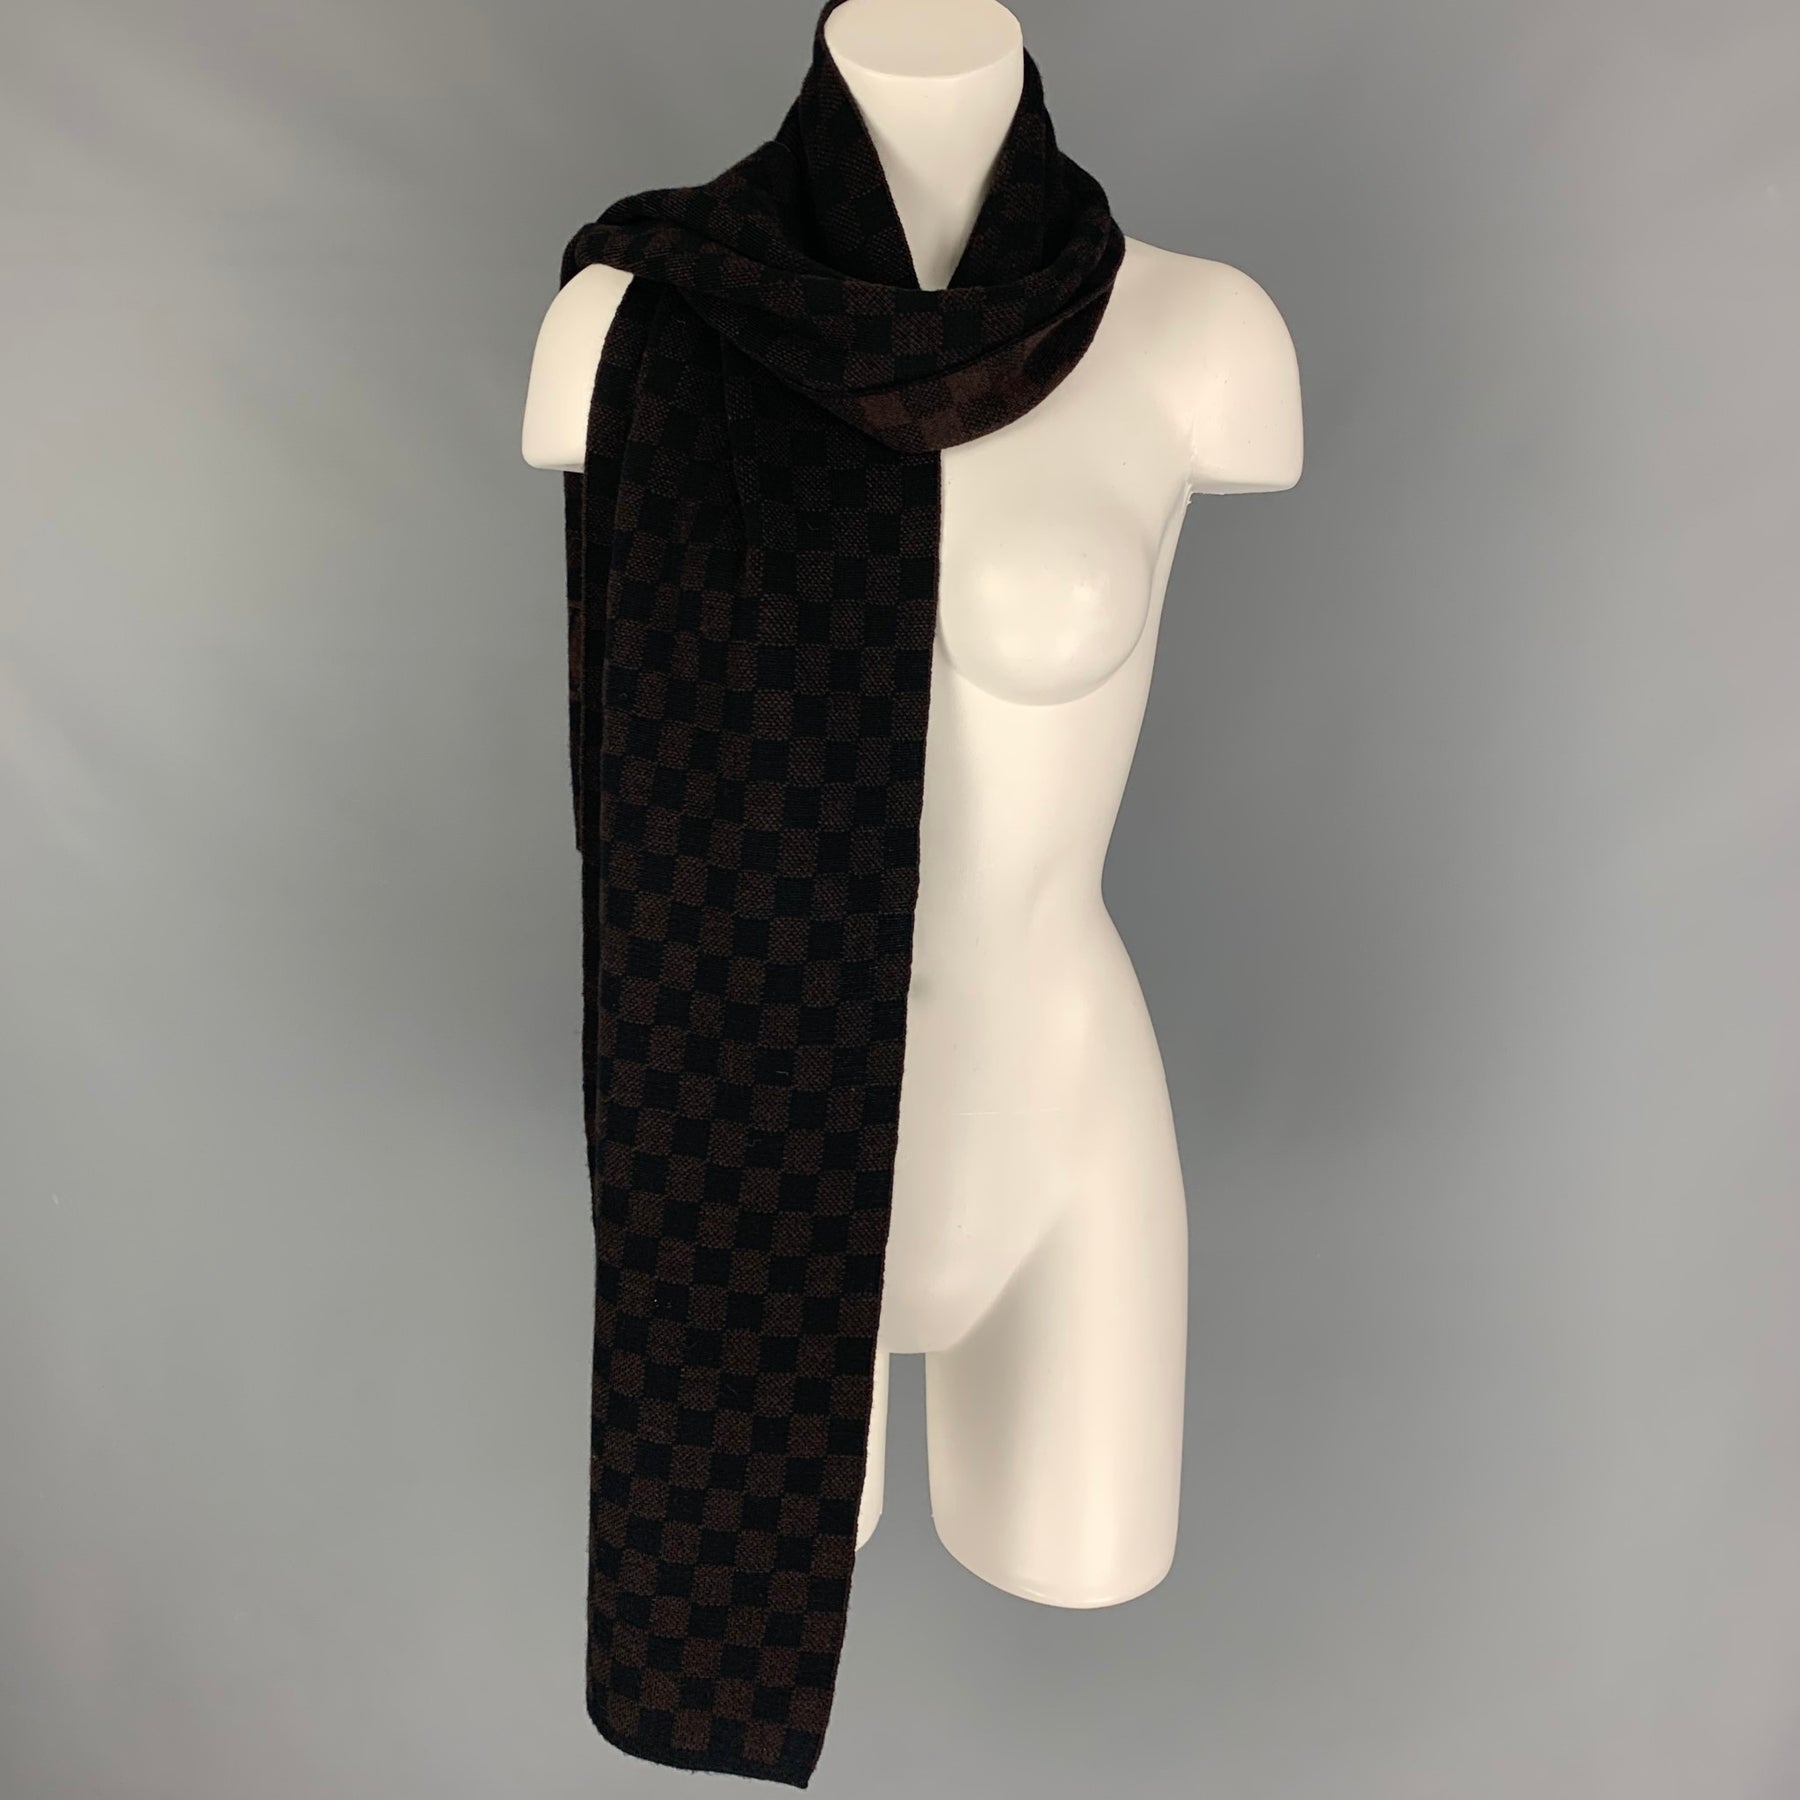 damier scarf and